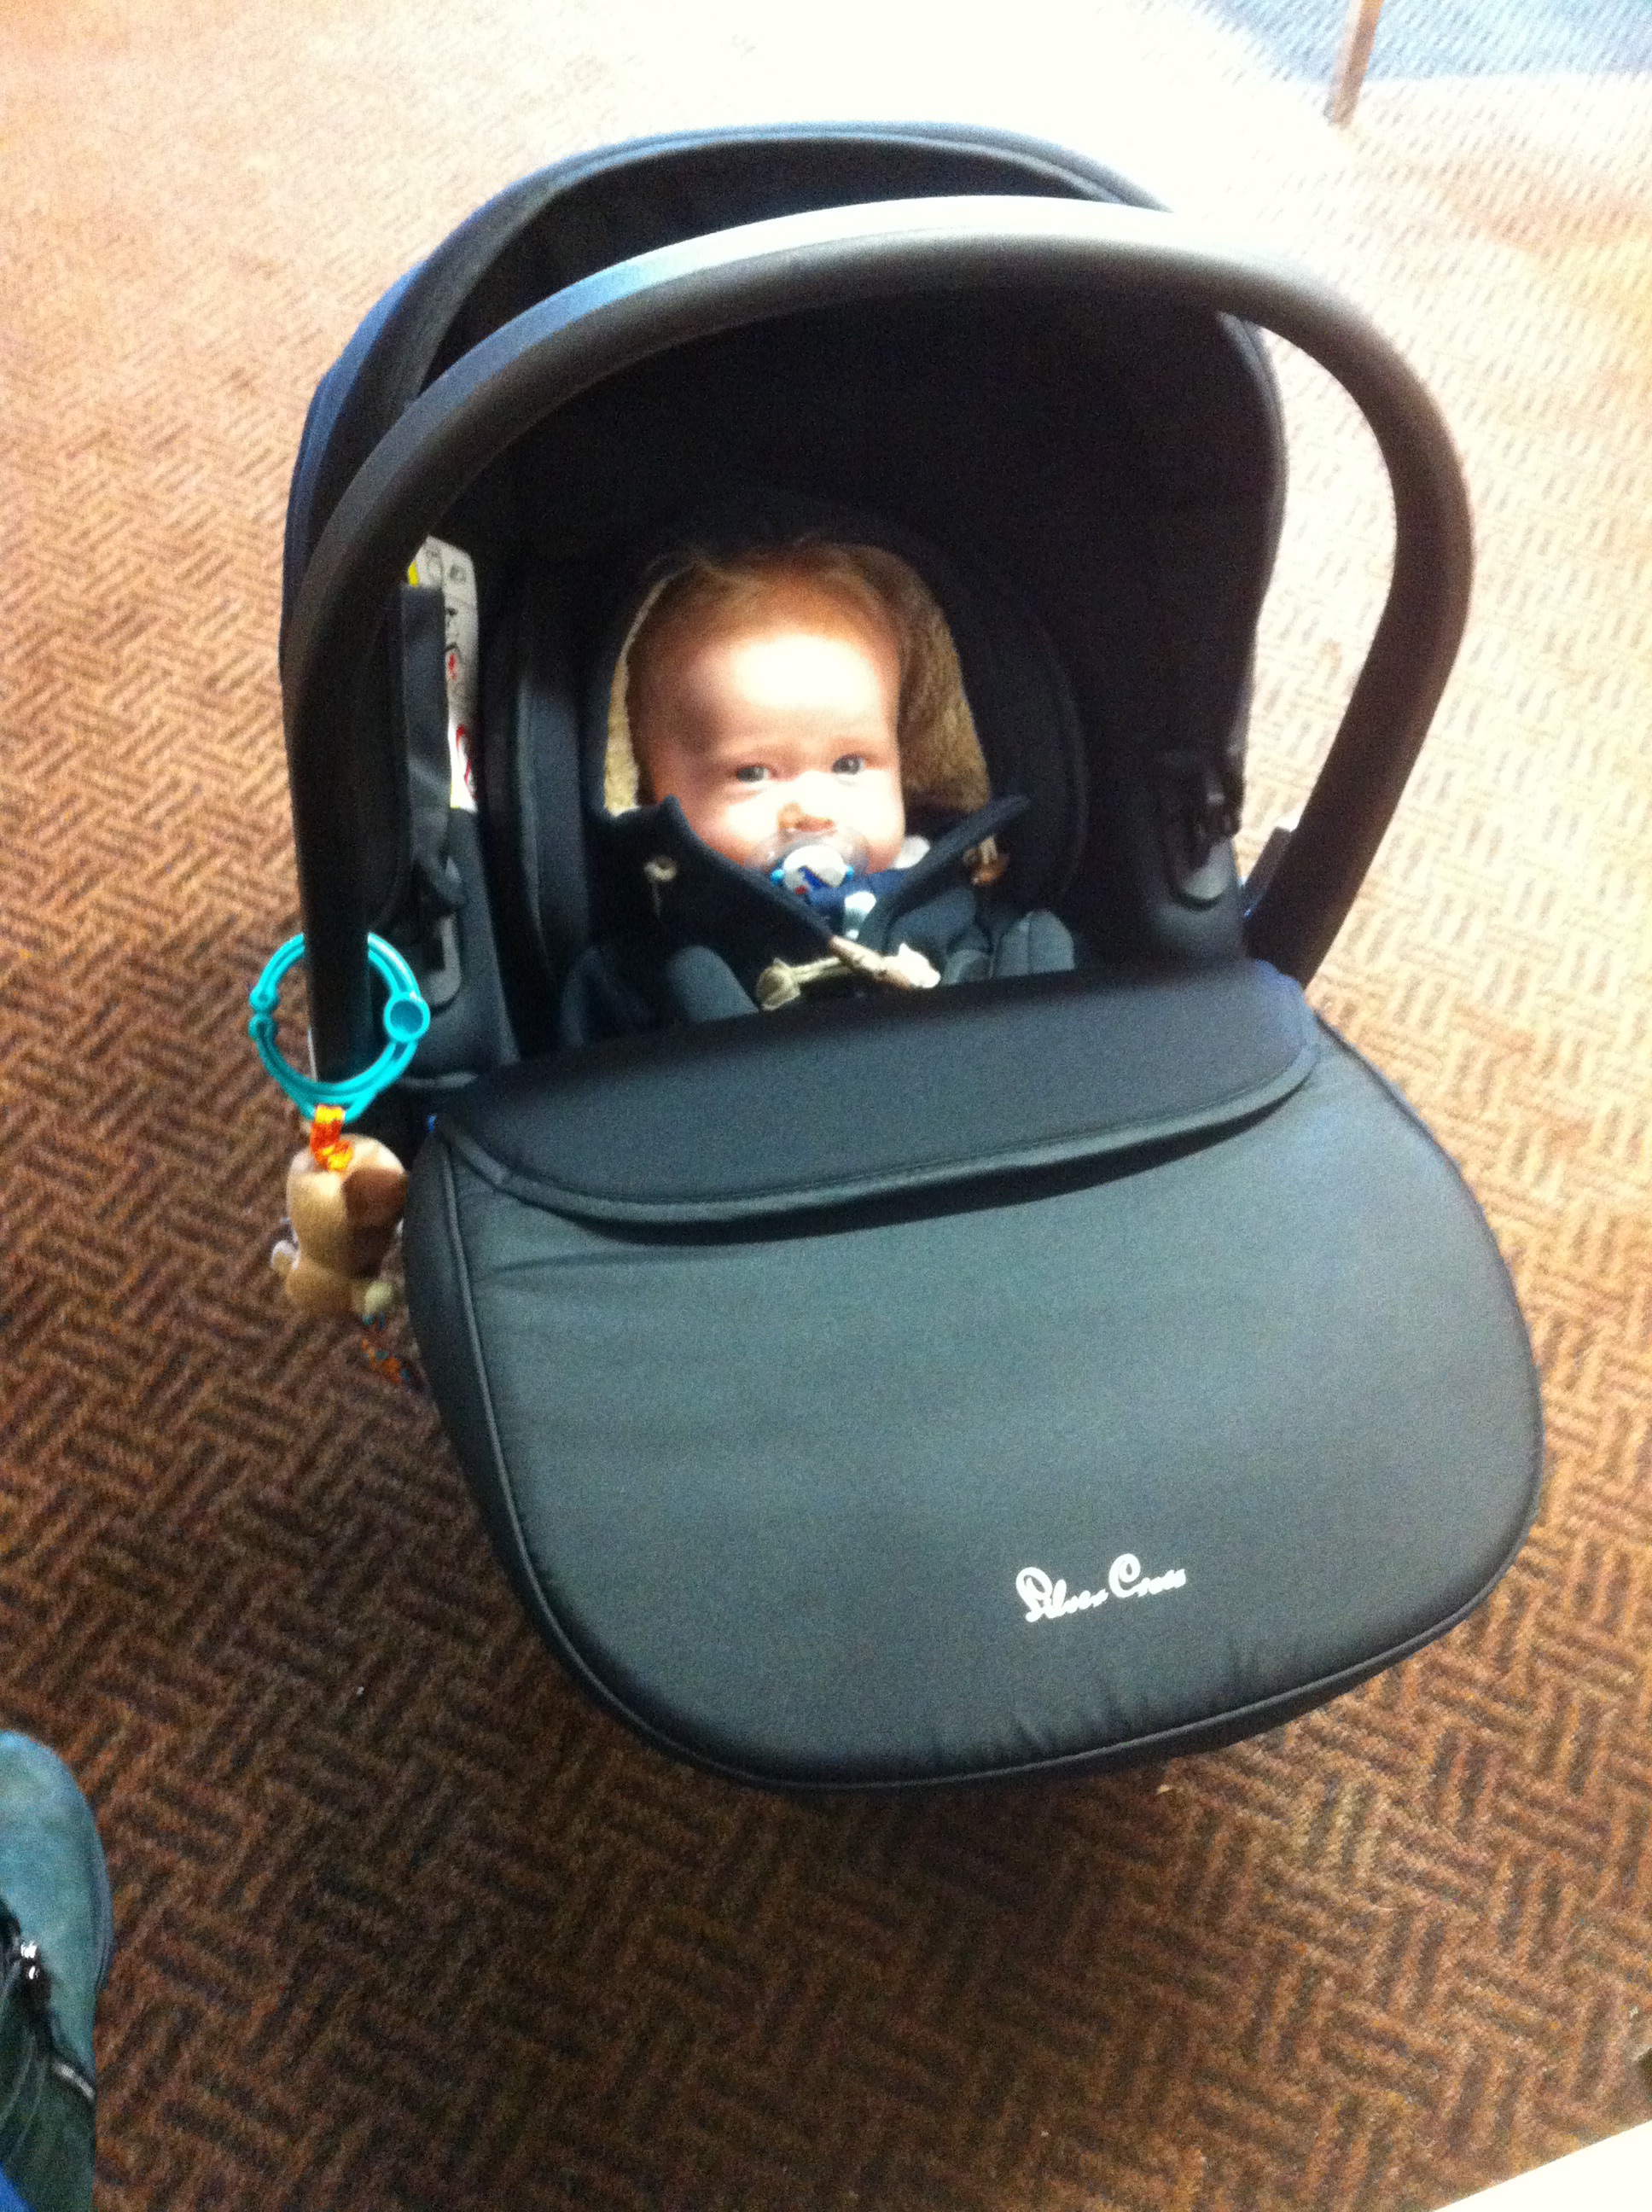 Silver Cross Simplicity Car Seat Review